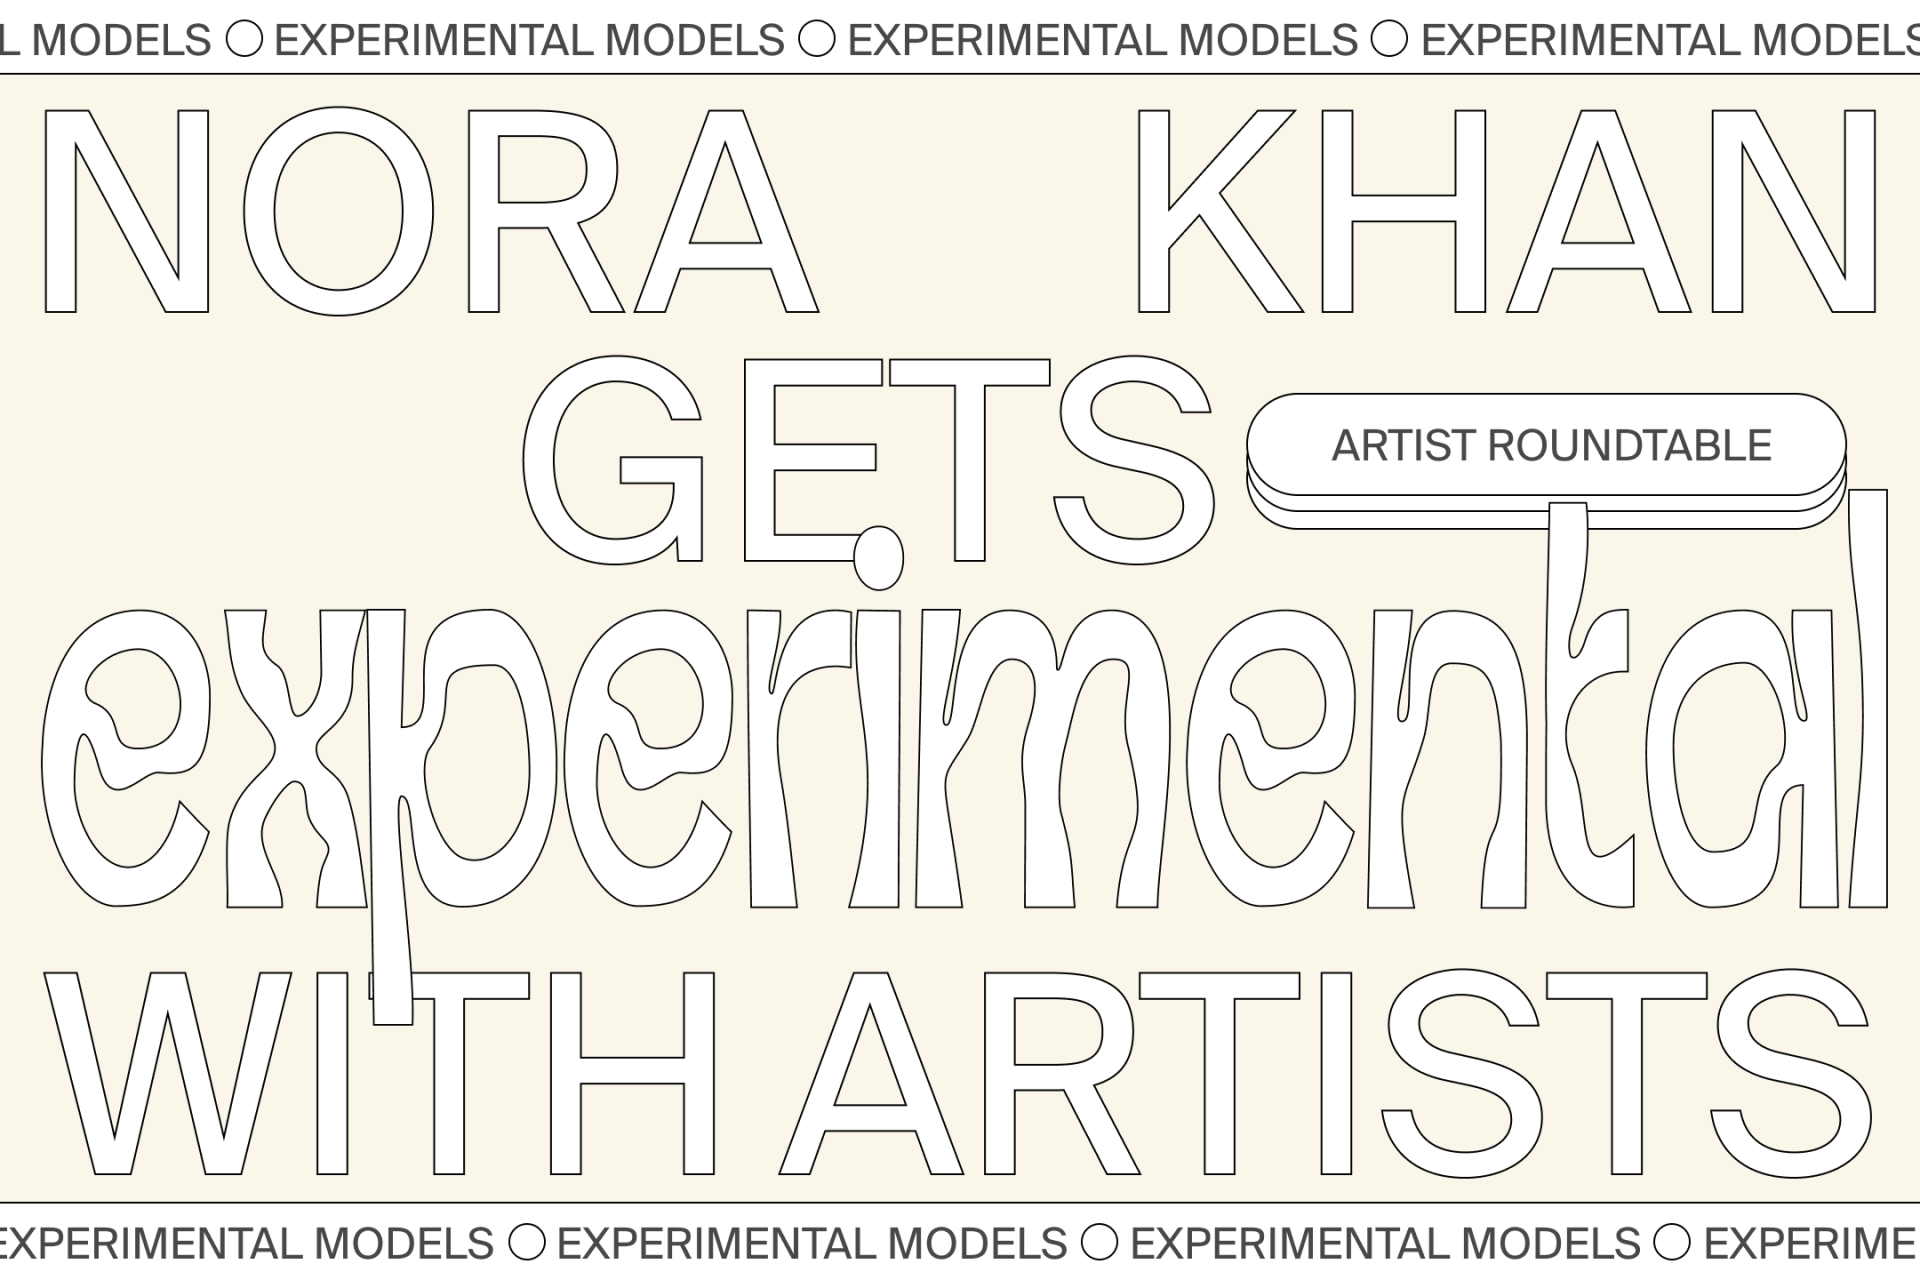 Nora Khan gets experimental with artists.